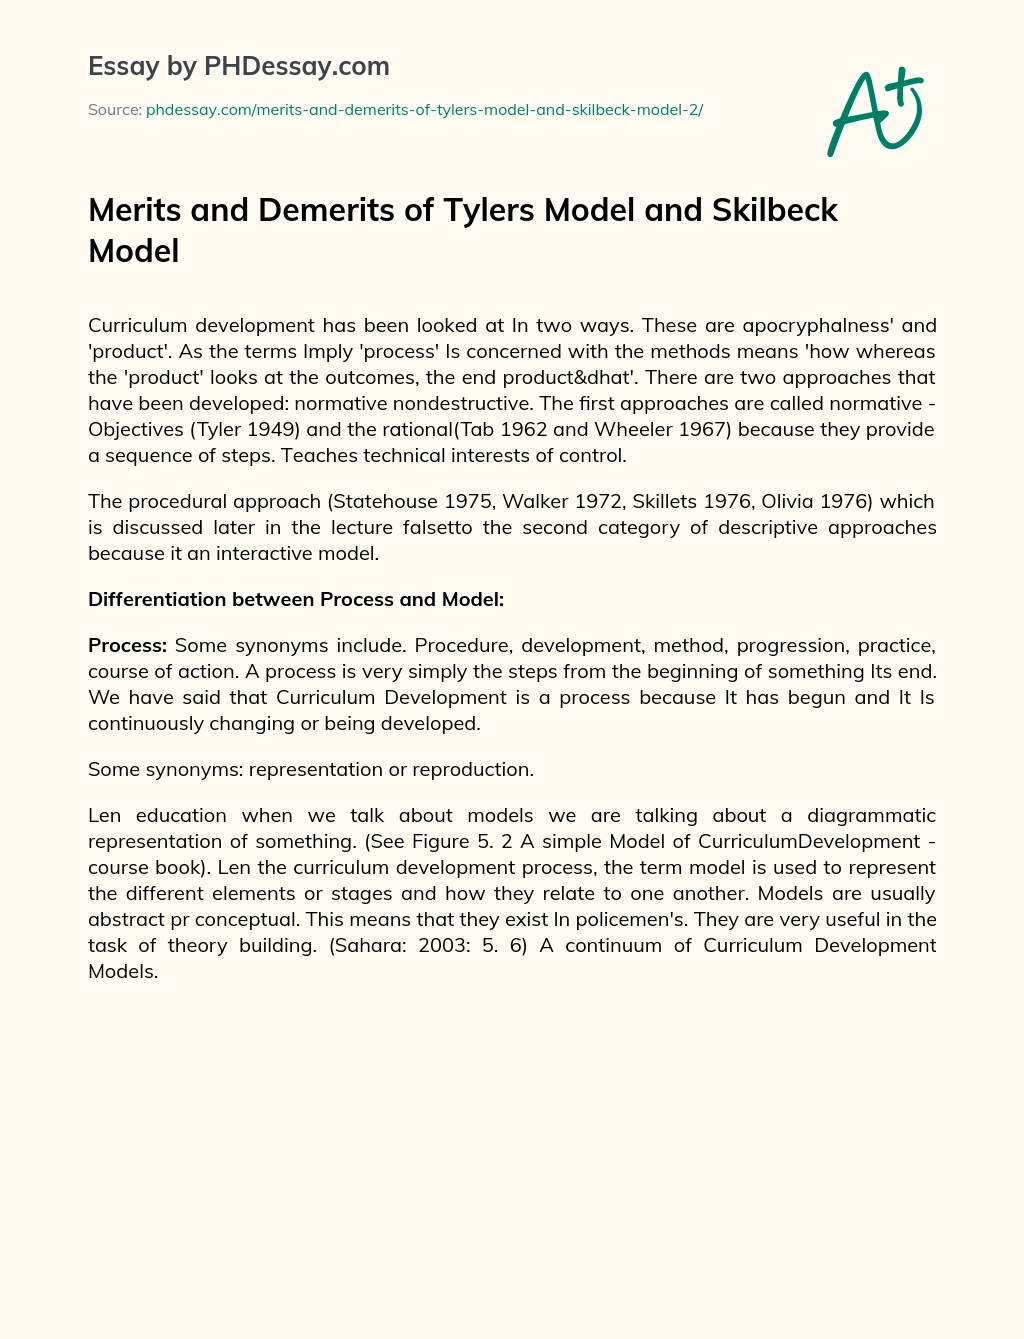 Merits and Demerits of Tylers Model and Skilbeck Model essay